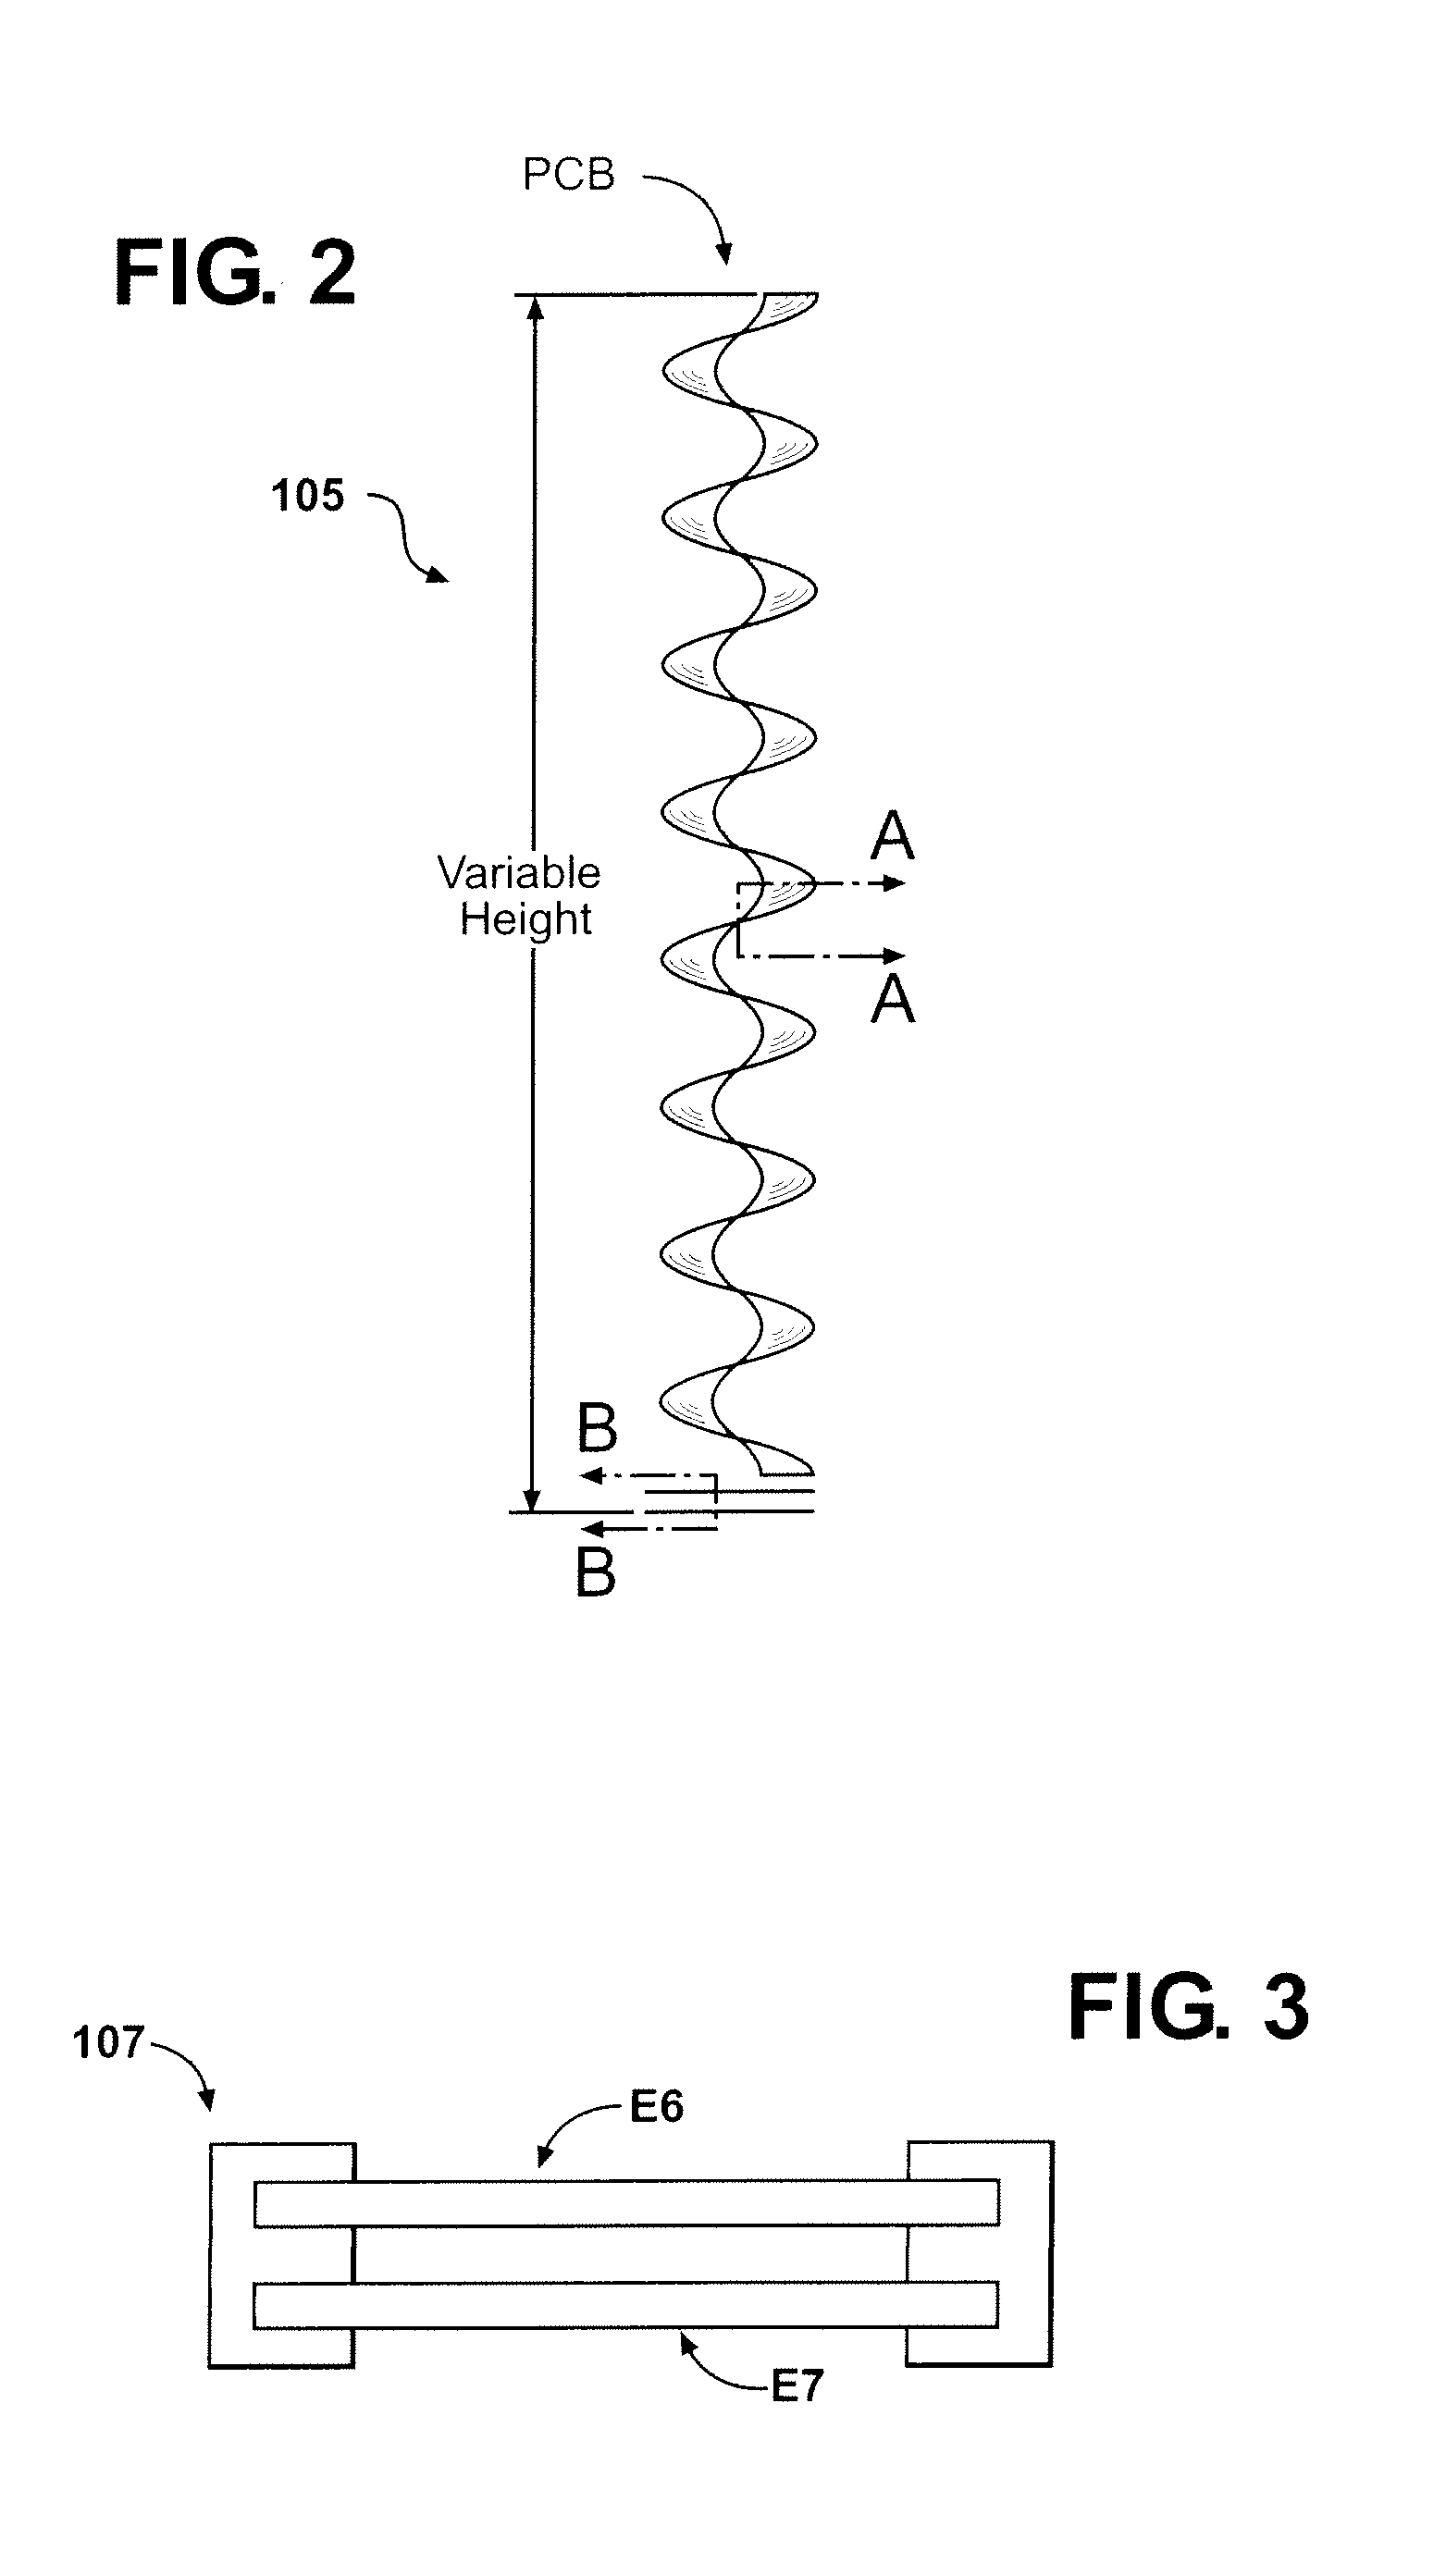 Fuel system electro-static potential differential level sensor element and hardware/software configuration